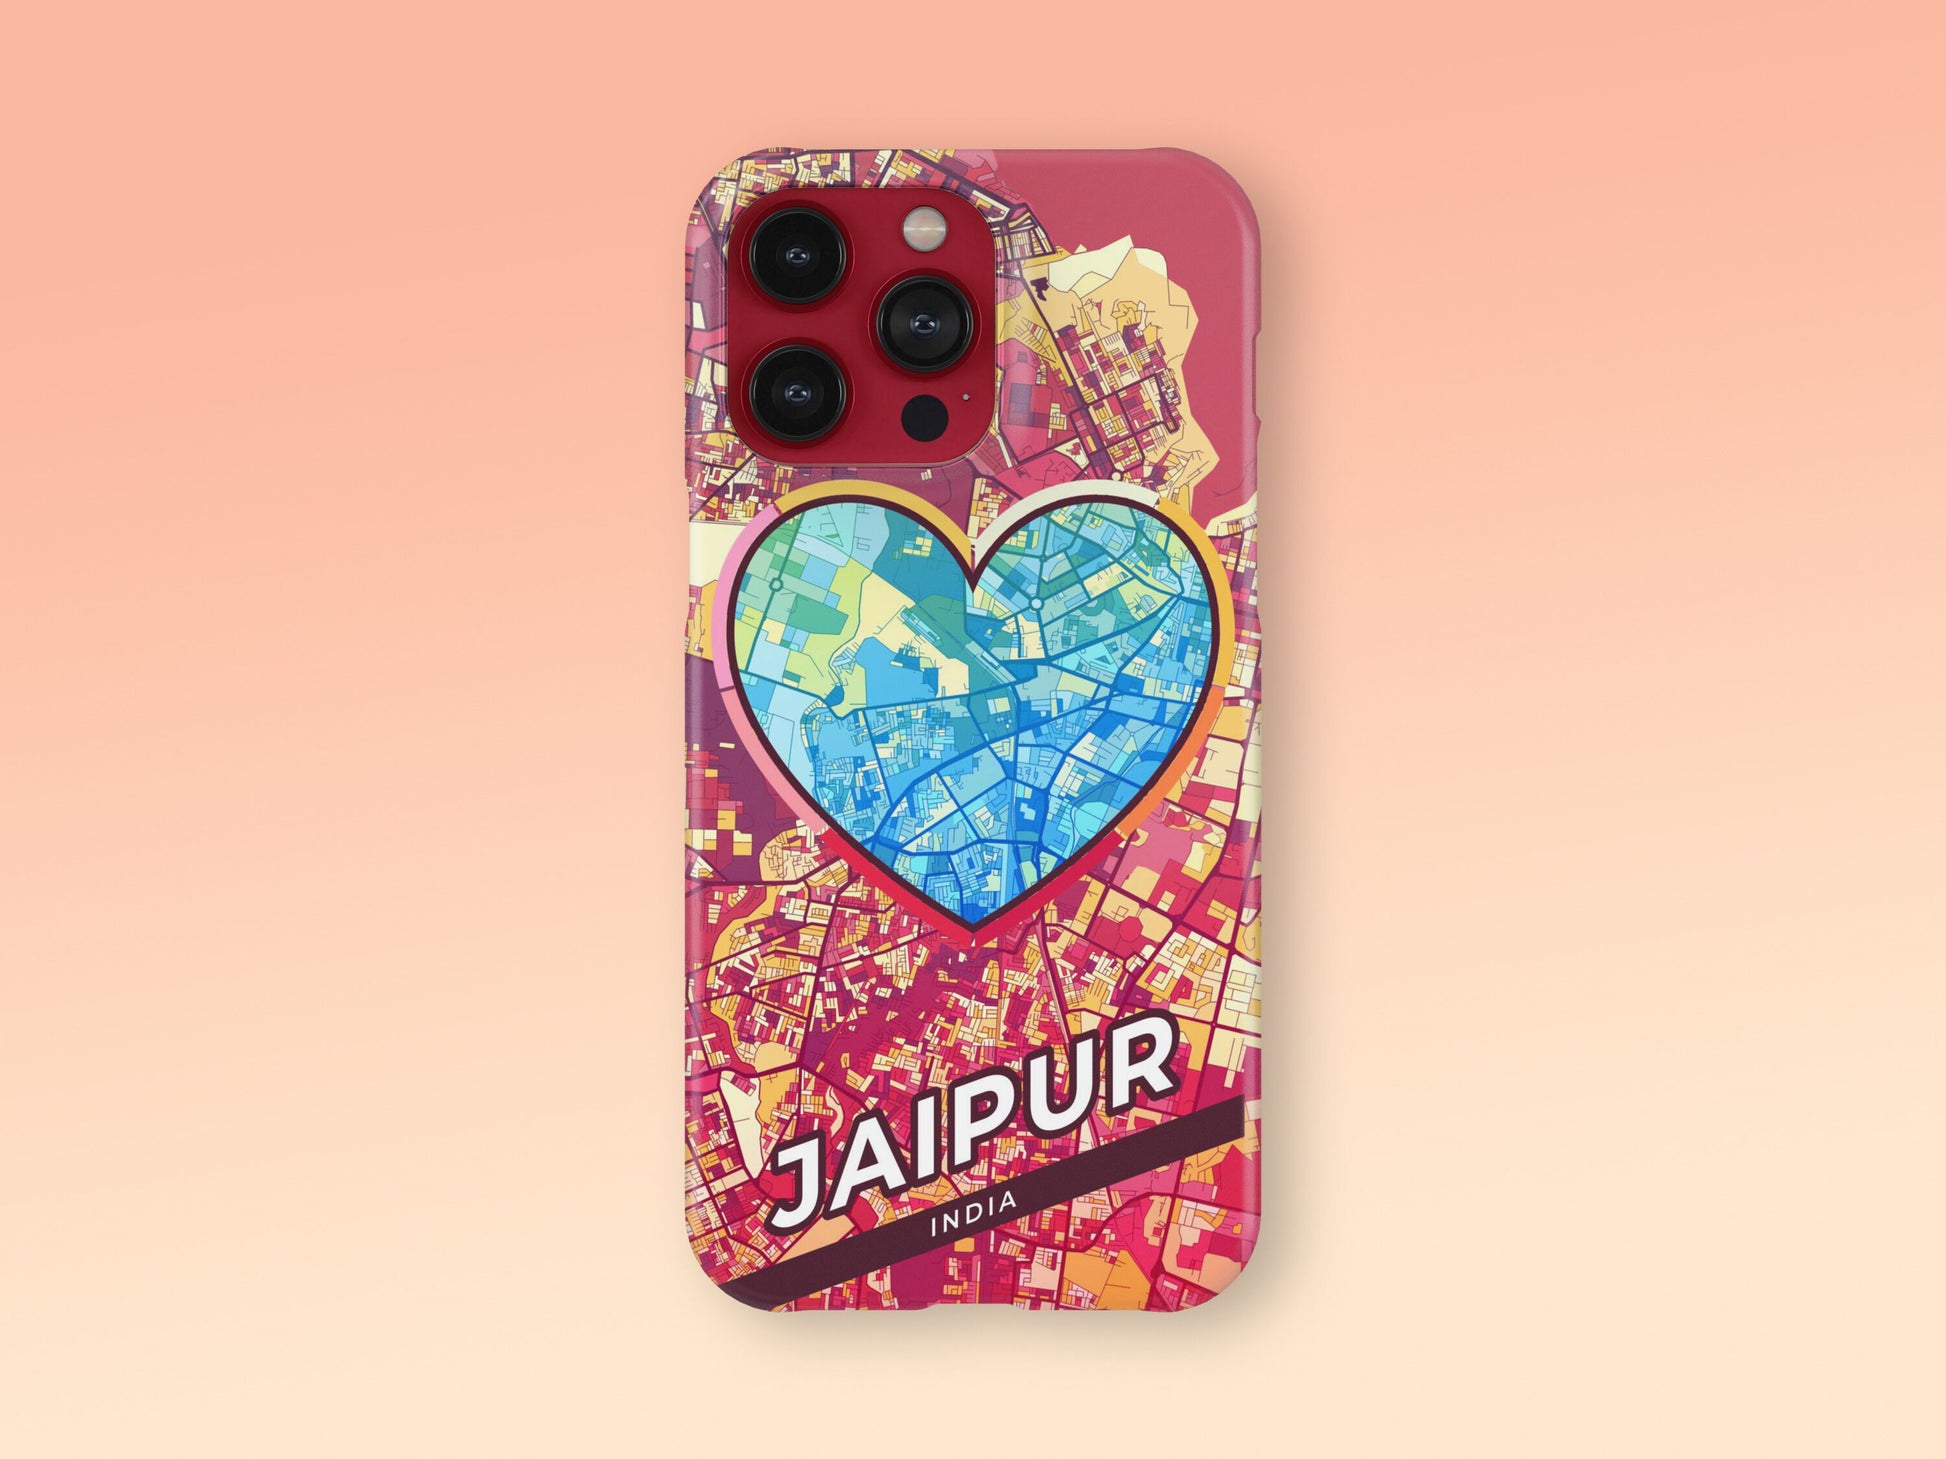 Jaipur India slim phone case with colorful icon. Birthday, wedding or housewarming gift. Couple match cases. 2